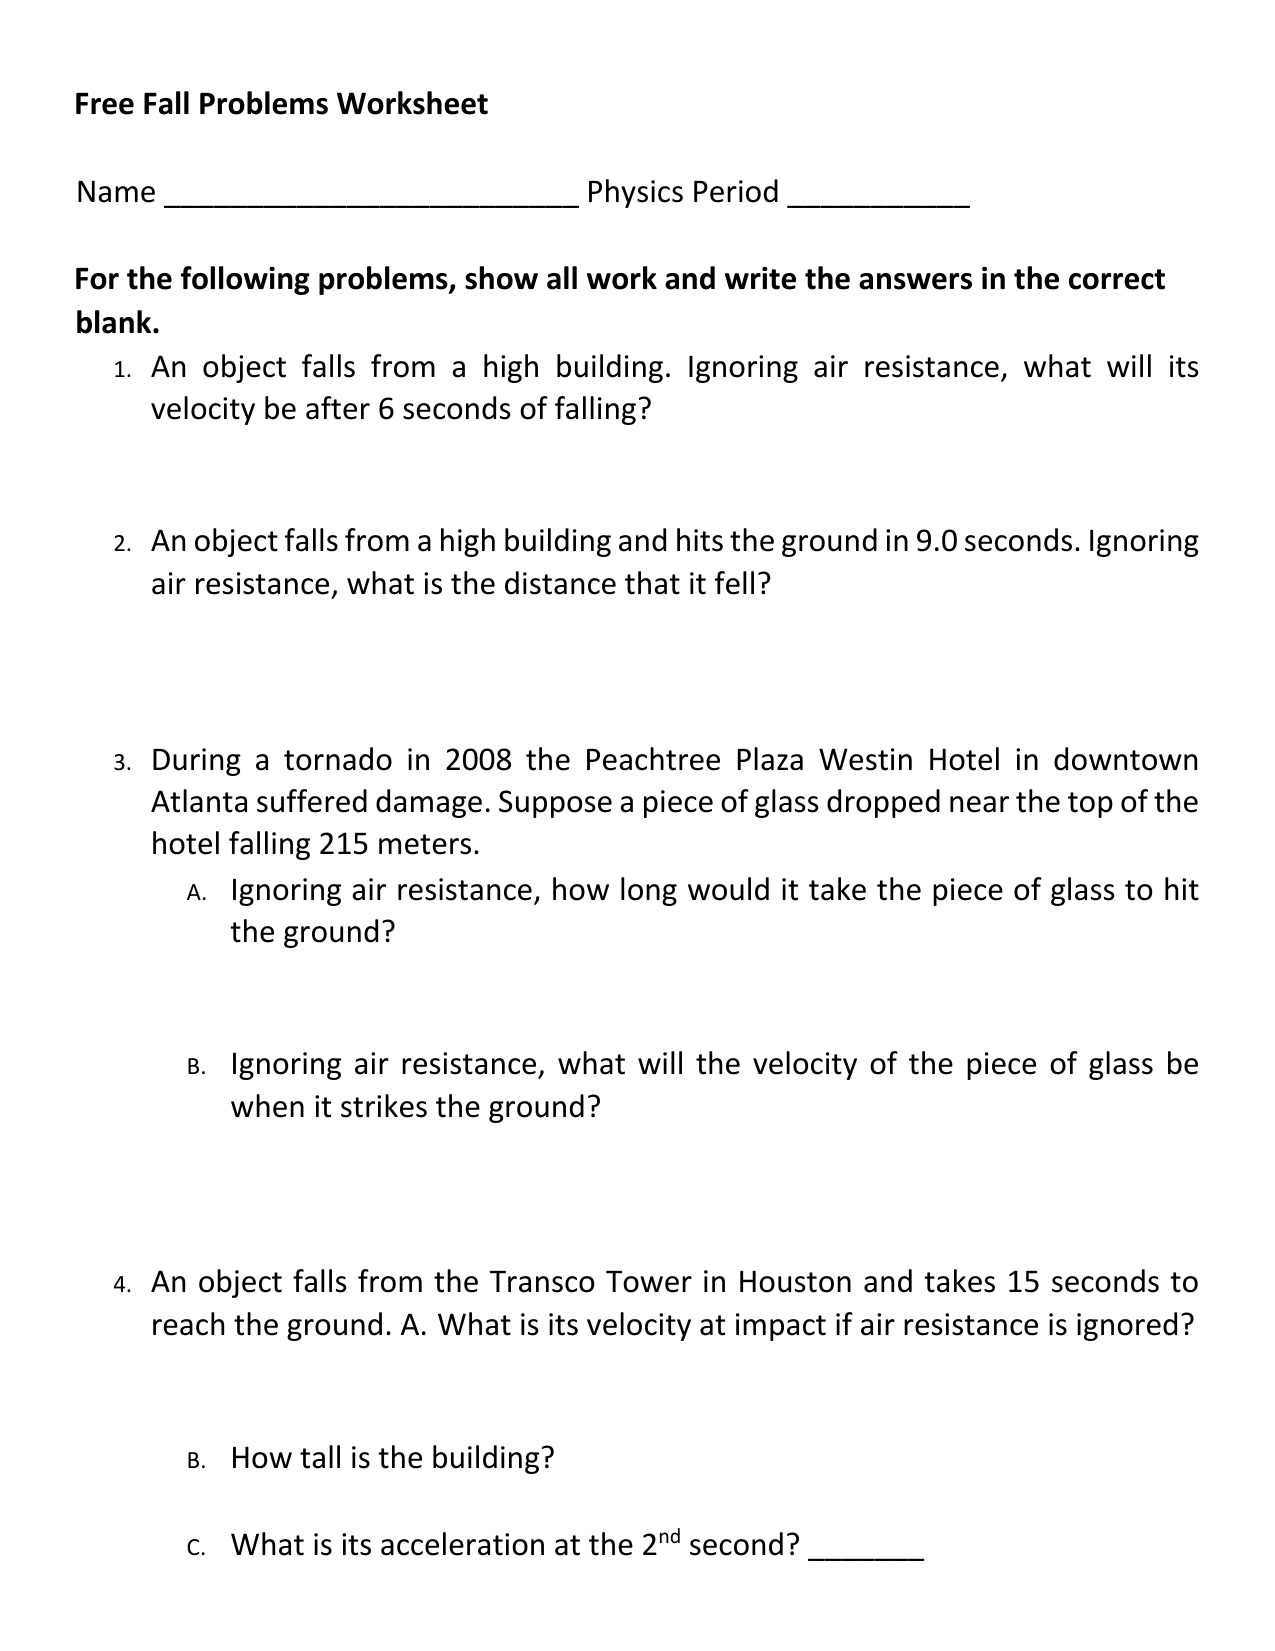 free-fall-worksheet makeup work 20 With Free Fall Problems Worksheet